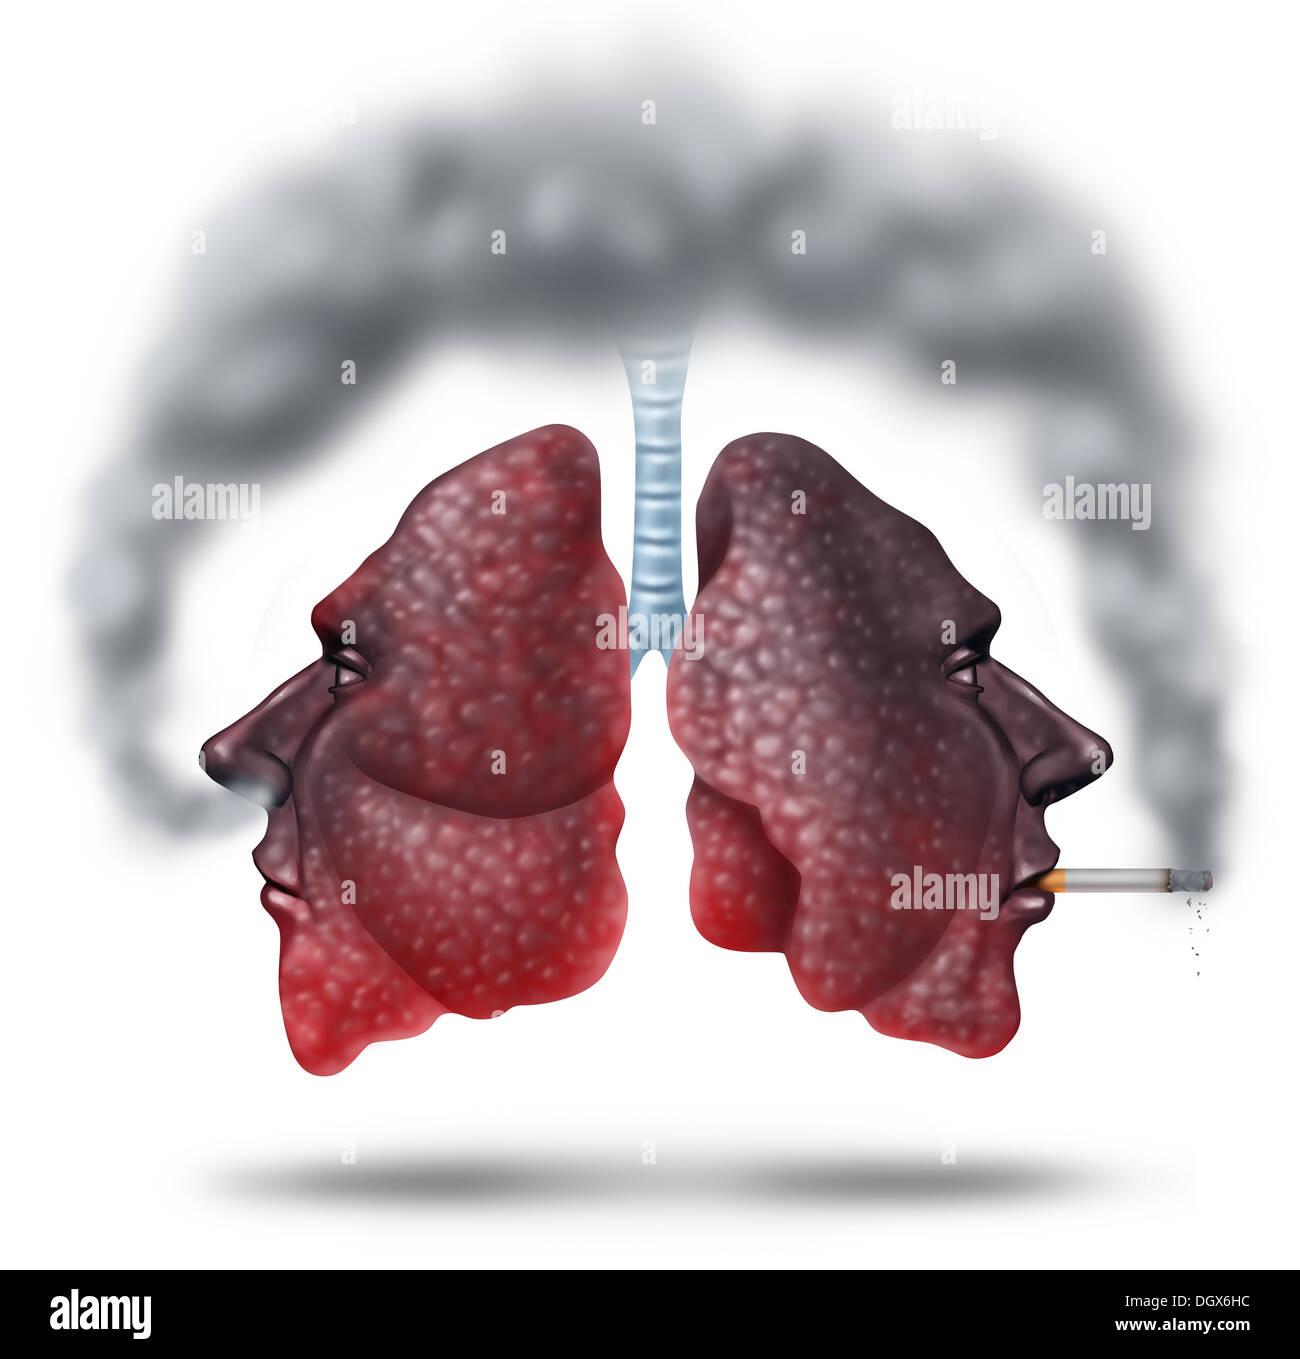 Second hand smoke health care concept for cigarette smoking risks with human lungs in the shape of a head with one smoker and another innocent victim lung breathing the toxic fumes turning the organ black. Stock Photo